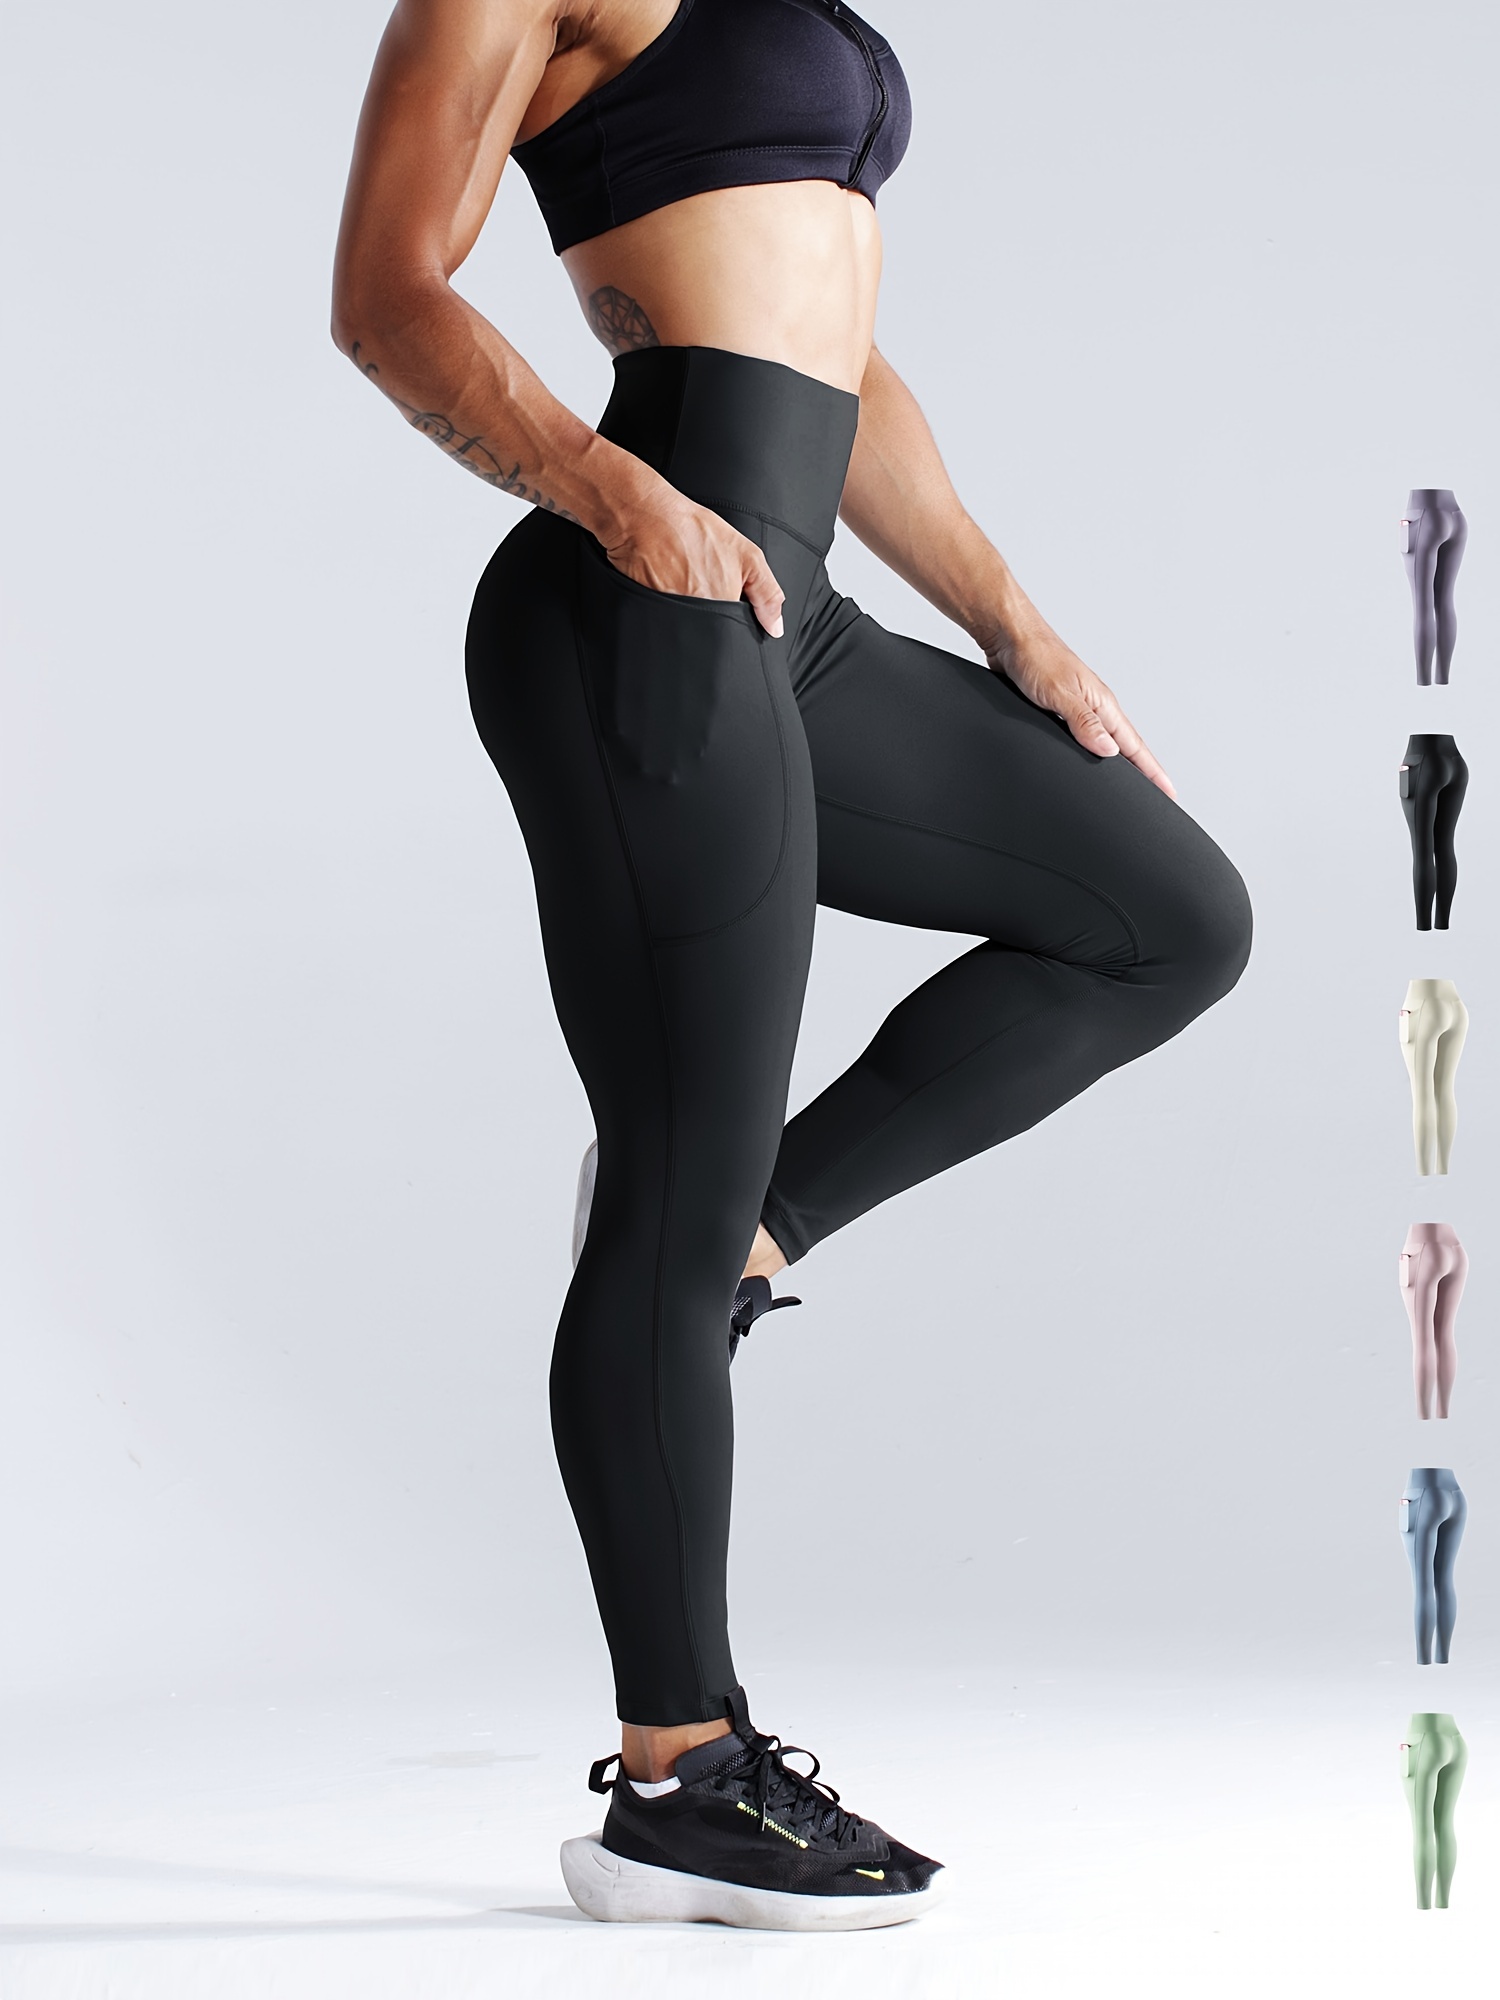 Women's Black Thermal Yoga Pants with Slimming Side Pockets - Stretchy and  Comfortable Activewear for Running and Fitness